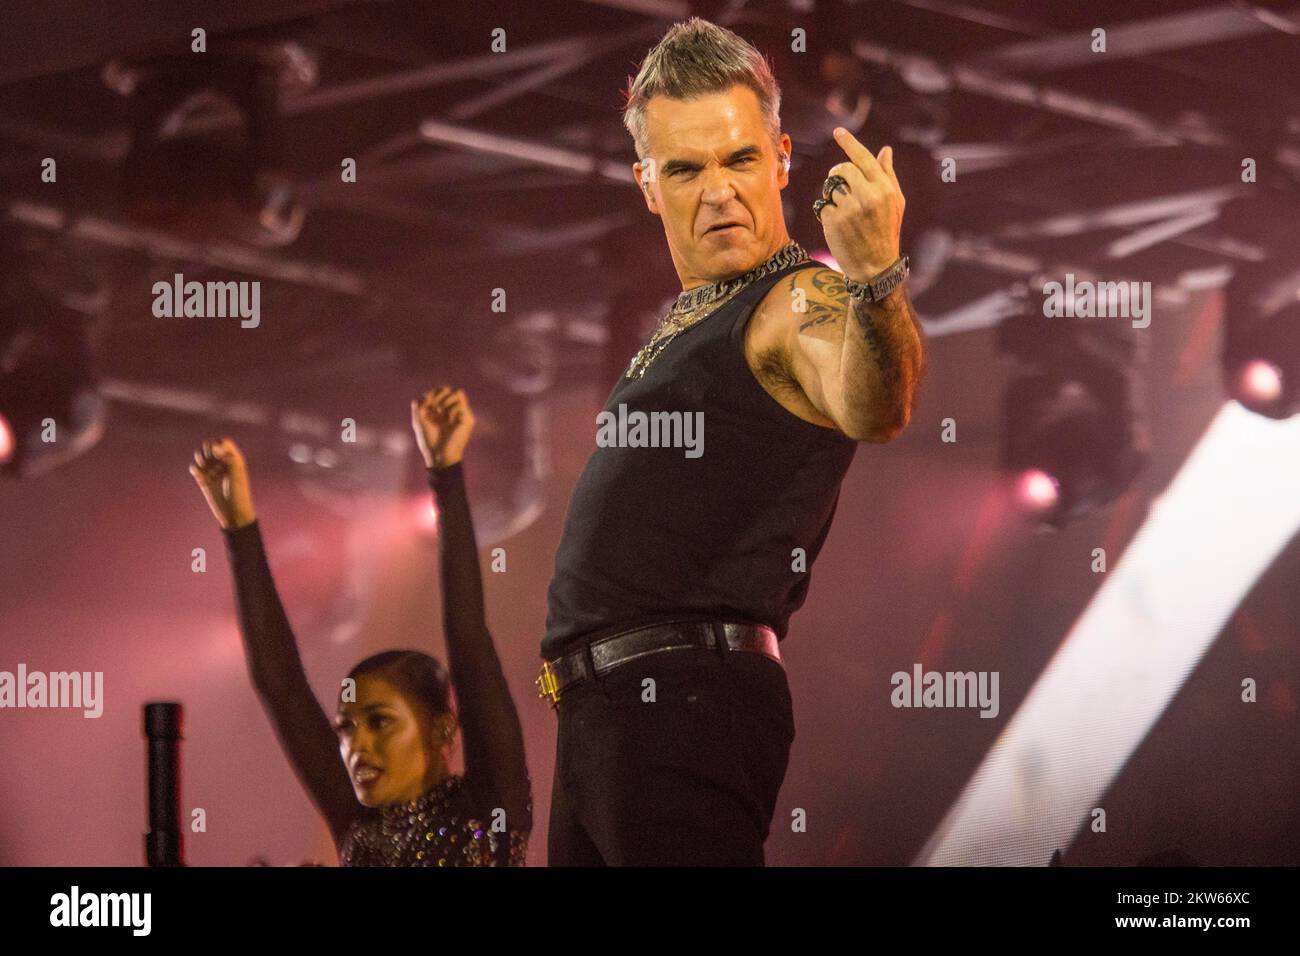 Robbie Williams Concert, Exhibition Centre, Munich, Germany, 27.08.2022, Europe Stock Photo